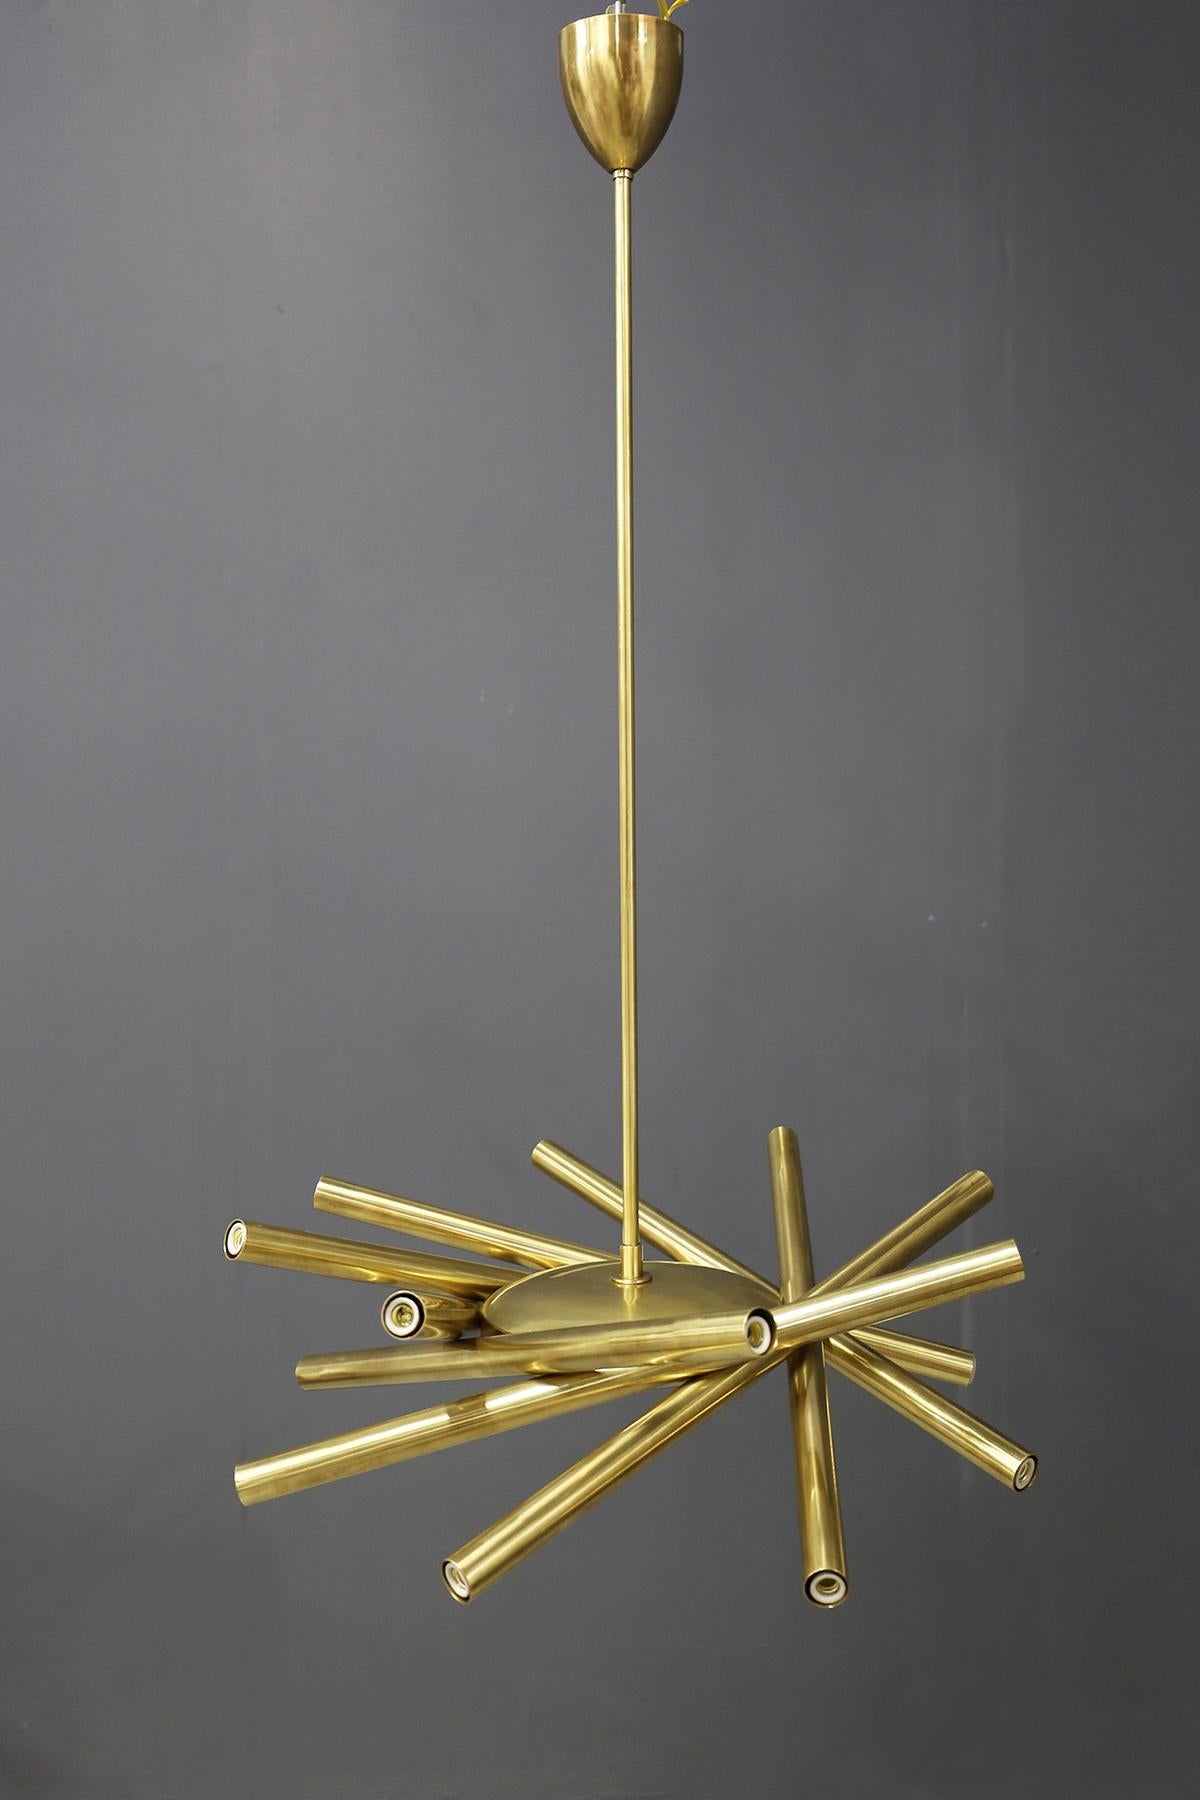 Elegant midcentury style Italian chandelier made entirely of solid brass.
The chandelier is suspended, with seven tubes and at the ends we find the system for two bulbs for a total of fourteen-light.
The chandelier is in the style of the 1950s but